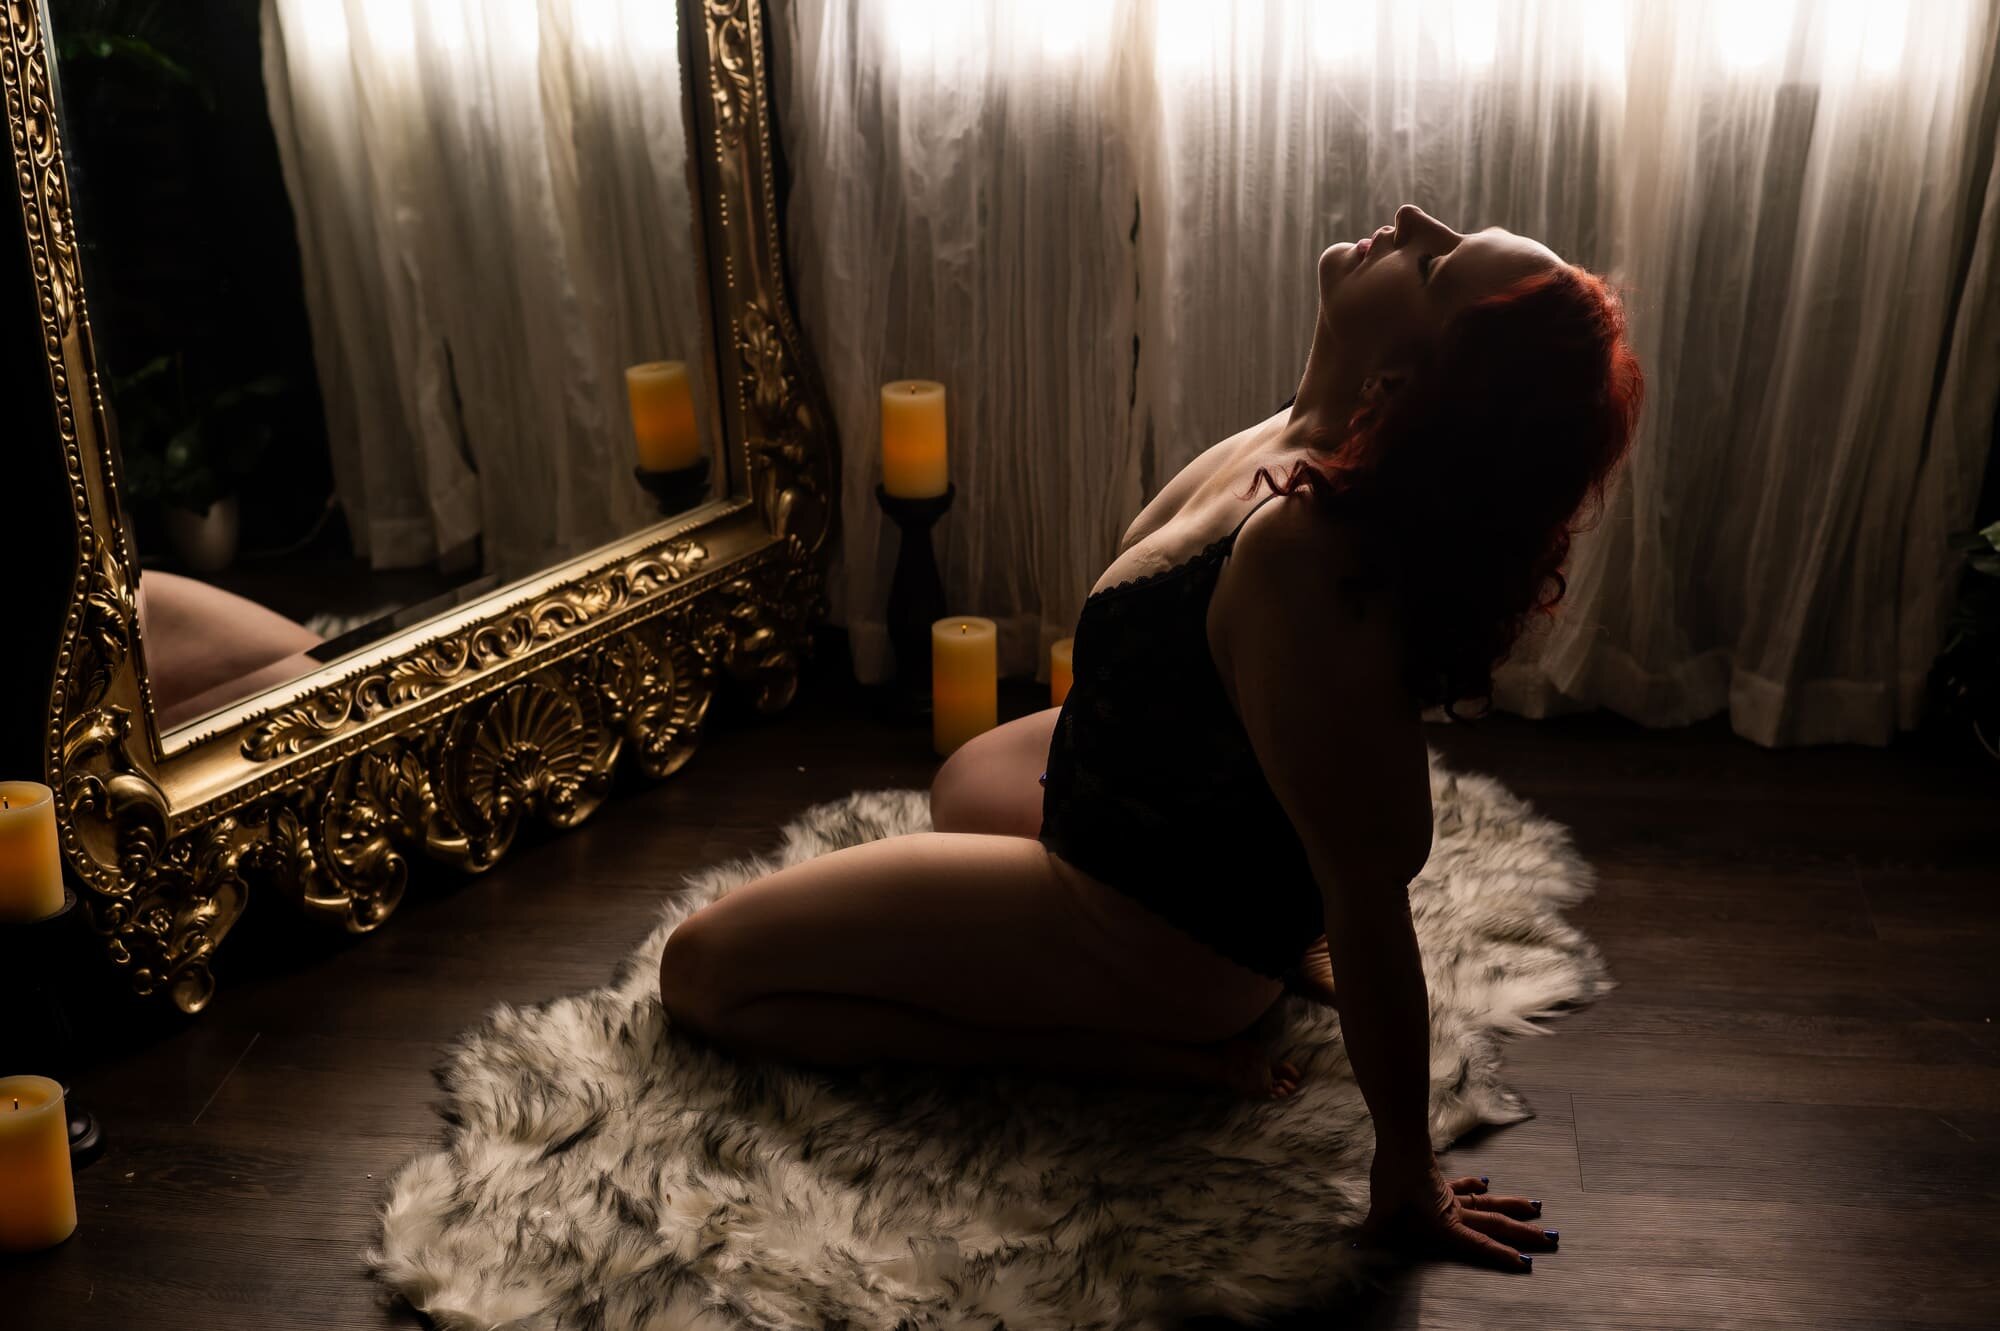 A woman in black lingerie poses in front of a mirror at a boudoir studio in rochester new york.